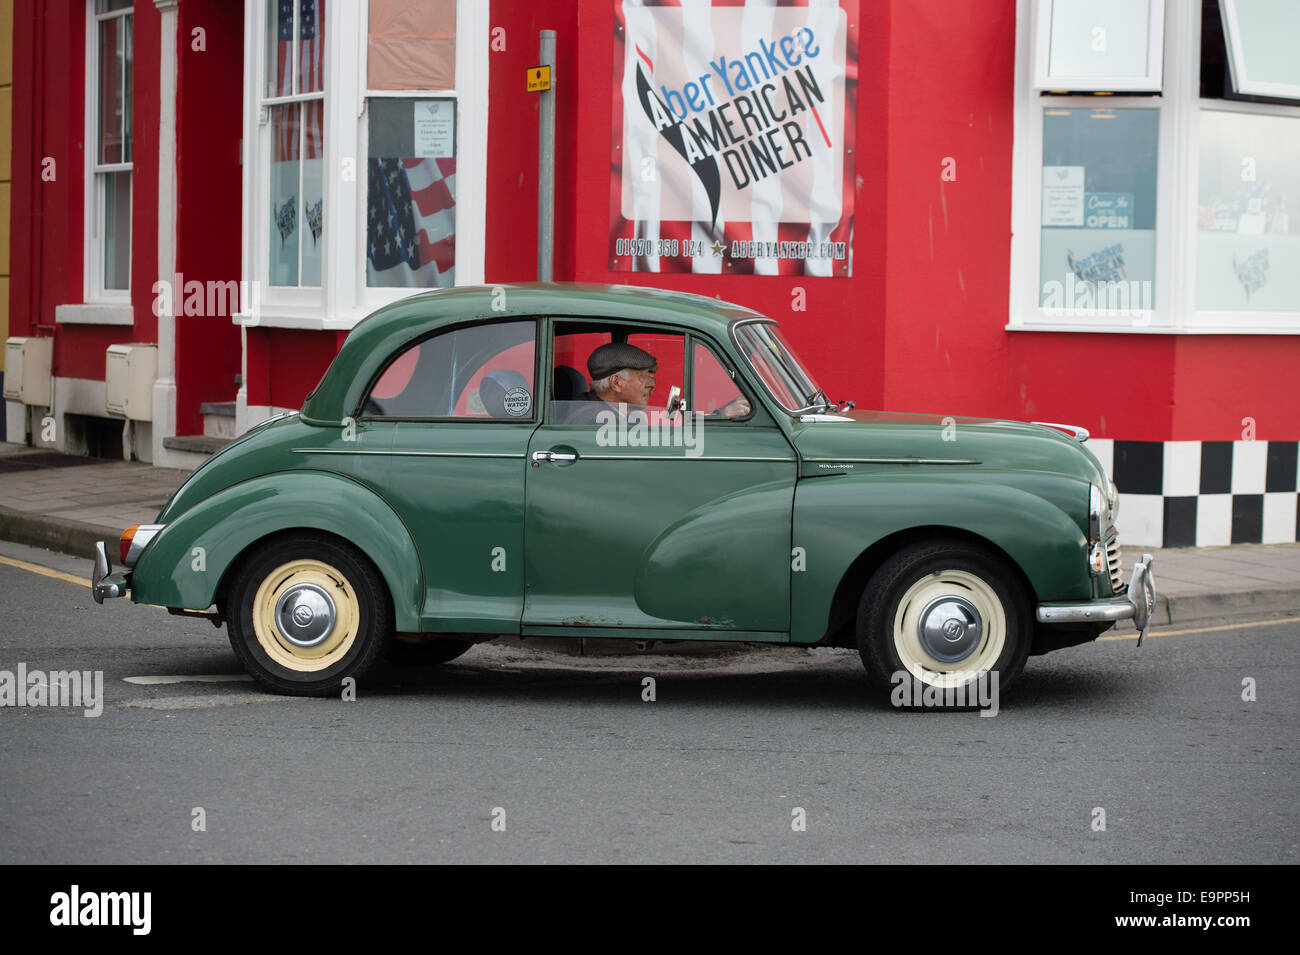 Aberystwyth Wales UK, Friday 31 October 2014  84 year old retired train driver JOHN DAVIES of Aberystwyth UK, with his green  Morris Minor 1000 car, DFF 224C,  as it turns over the 300,000 mile mark on the day before its 49th birthday.   The car was first registered on Nov 1 1965, and has been used by John virtually every day since he got it from his brother in 1984. Credit:  keith morris/Alamy Live News Stock Photo